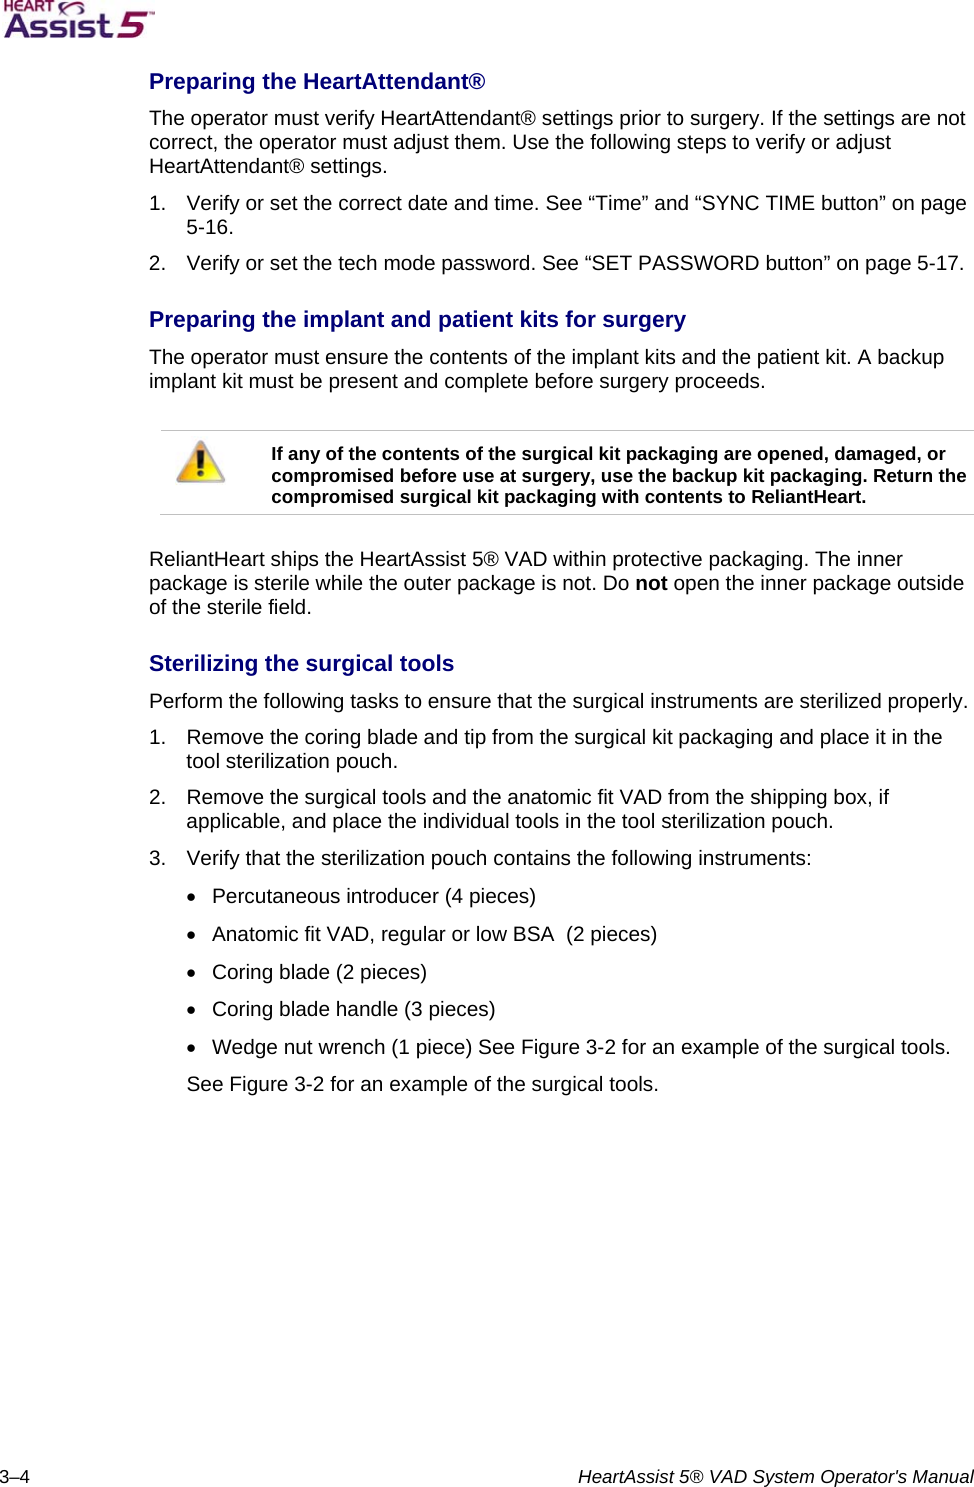   3–4  HeartAssist 5® VAD System Operator&apos;s Manual Preparing the HeartAttendant®  The operator must verify HeartAttendant® settings prior to surgery. If the settings are not correct, the operator must adjust them. Use the following steps to verify or adjust HeartAttendant® settings.  1.  Verify or set the correct date and time. See “Time” and “SYNC TIME button” on page 5-16.  2.  Verify or set the tech mode password. See “SET PASSWORD button” on page 5-17.  Preparing the implant and patient kits for surgery  The operator must ensure the contents of the implant kits and the patient kit. A backup implant kit must be present and complete before surgery proceeds.    If any of the contents of the surgical kit packaging are opened, damaged, or compromised before use at surgery, use the backup kit packaging. Return the compromised surgical kit packaging with contents to ReliantHeart.   ReliantHeart ships the HeartAssist 5® VAD within protective packaging. The inner package is sterile while the outer package is not. Do not open the inner package outside of the sterile field.  Sterilizing the surgical tools  Perform the following tasks to ensure that the surgical instruments are sterilized properly.  1.  Remove the coring blade and tip from the surgical kit packaging and place it in the tool sterilization pouch.  2.  Remove the surgical tools and the anatomic fit VAD from the shipping box, if applicable, and place the individual tools in the tool sterilization pouch.  3.  Verify that the sterilization pouch contains the following instruments:    Percutaneous introducer (4 pieces)    Anatomic fit VAD, regular or low BSA  (2 pieces)    Coring blade (2 pieces)    Coring blade handle (3 pieces)    Wedge nut wrench (1 piece) See Figure 3-2 for an example of the surgical tools.  See Figure 3-2 for an example of the surgical tools. 